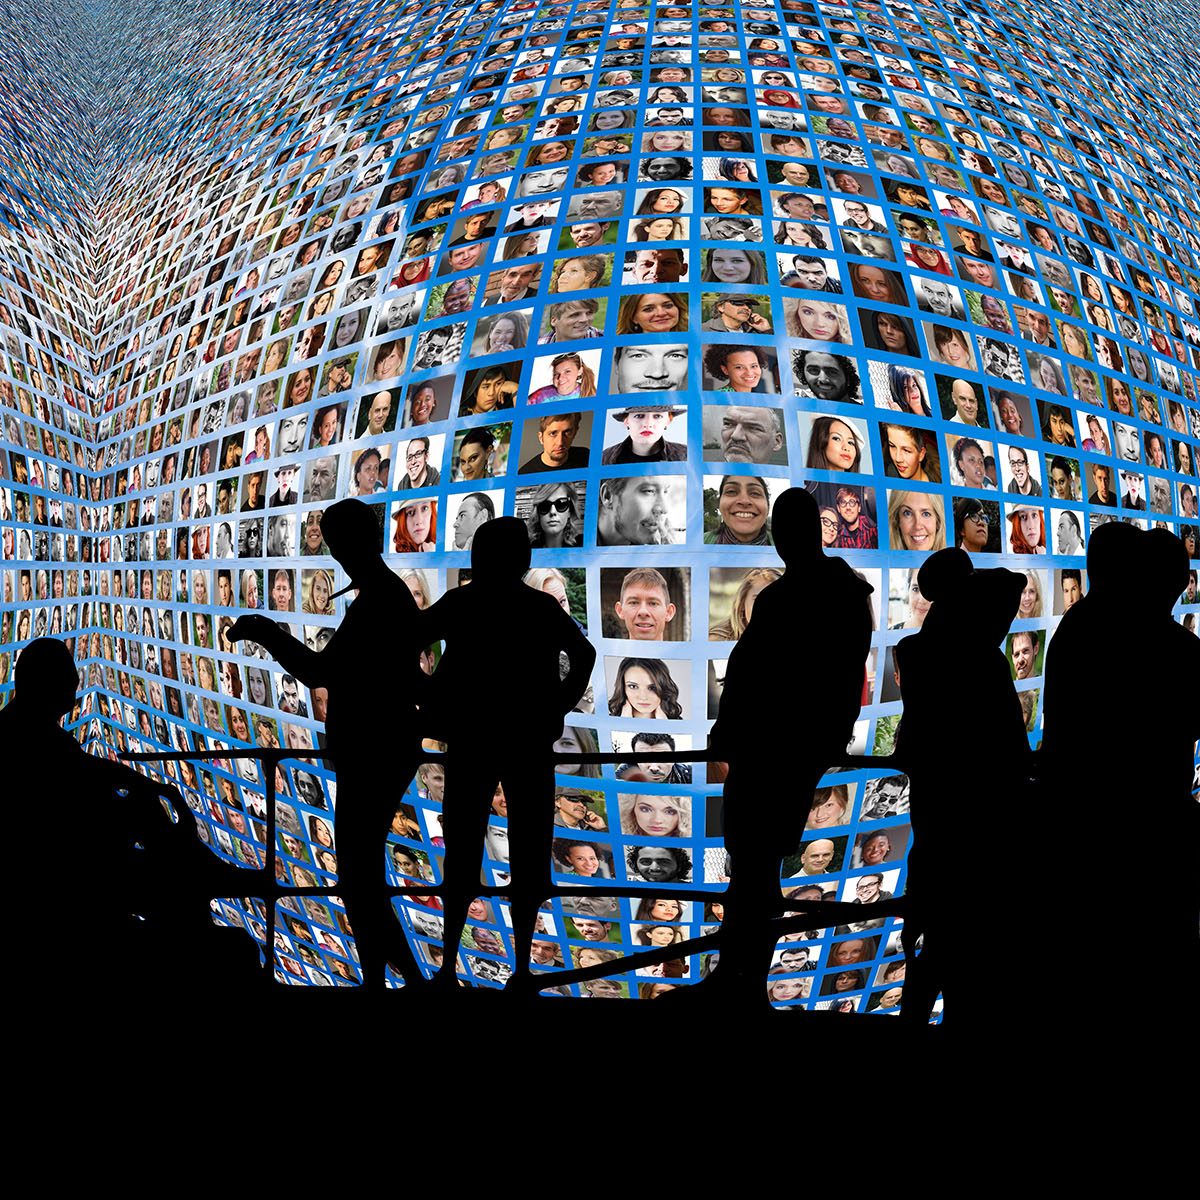 silhouettes in front of portrait photos on an undulating blue background